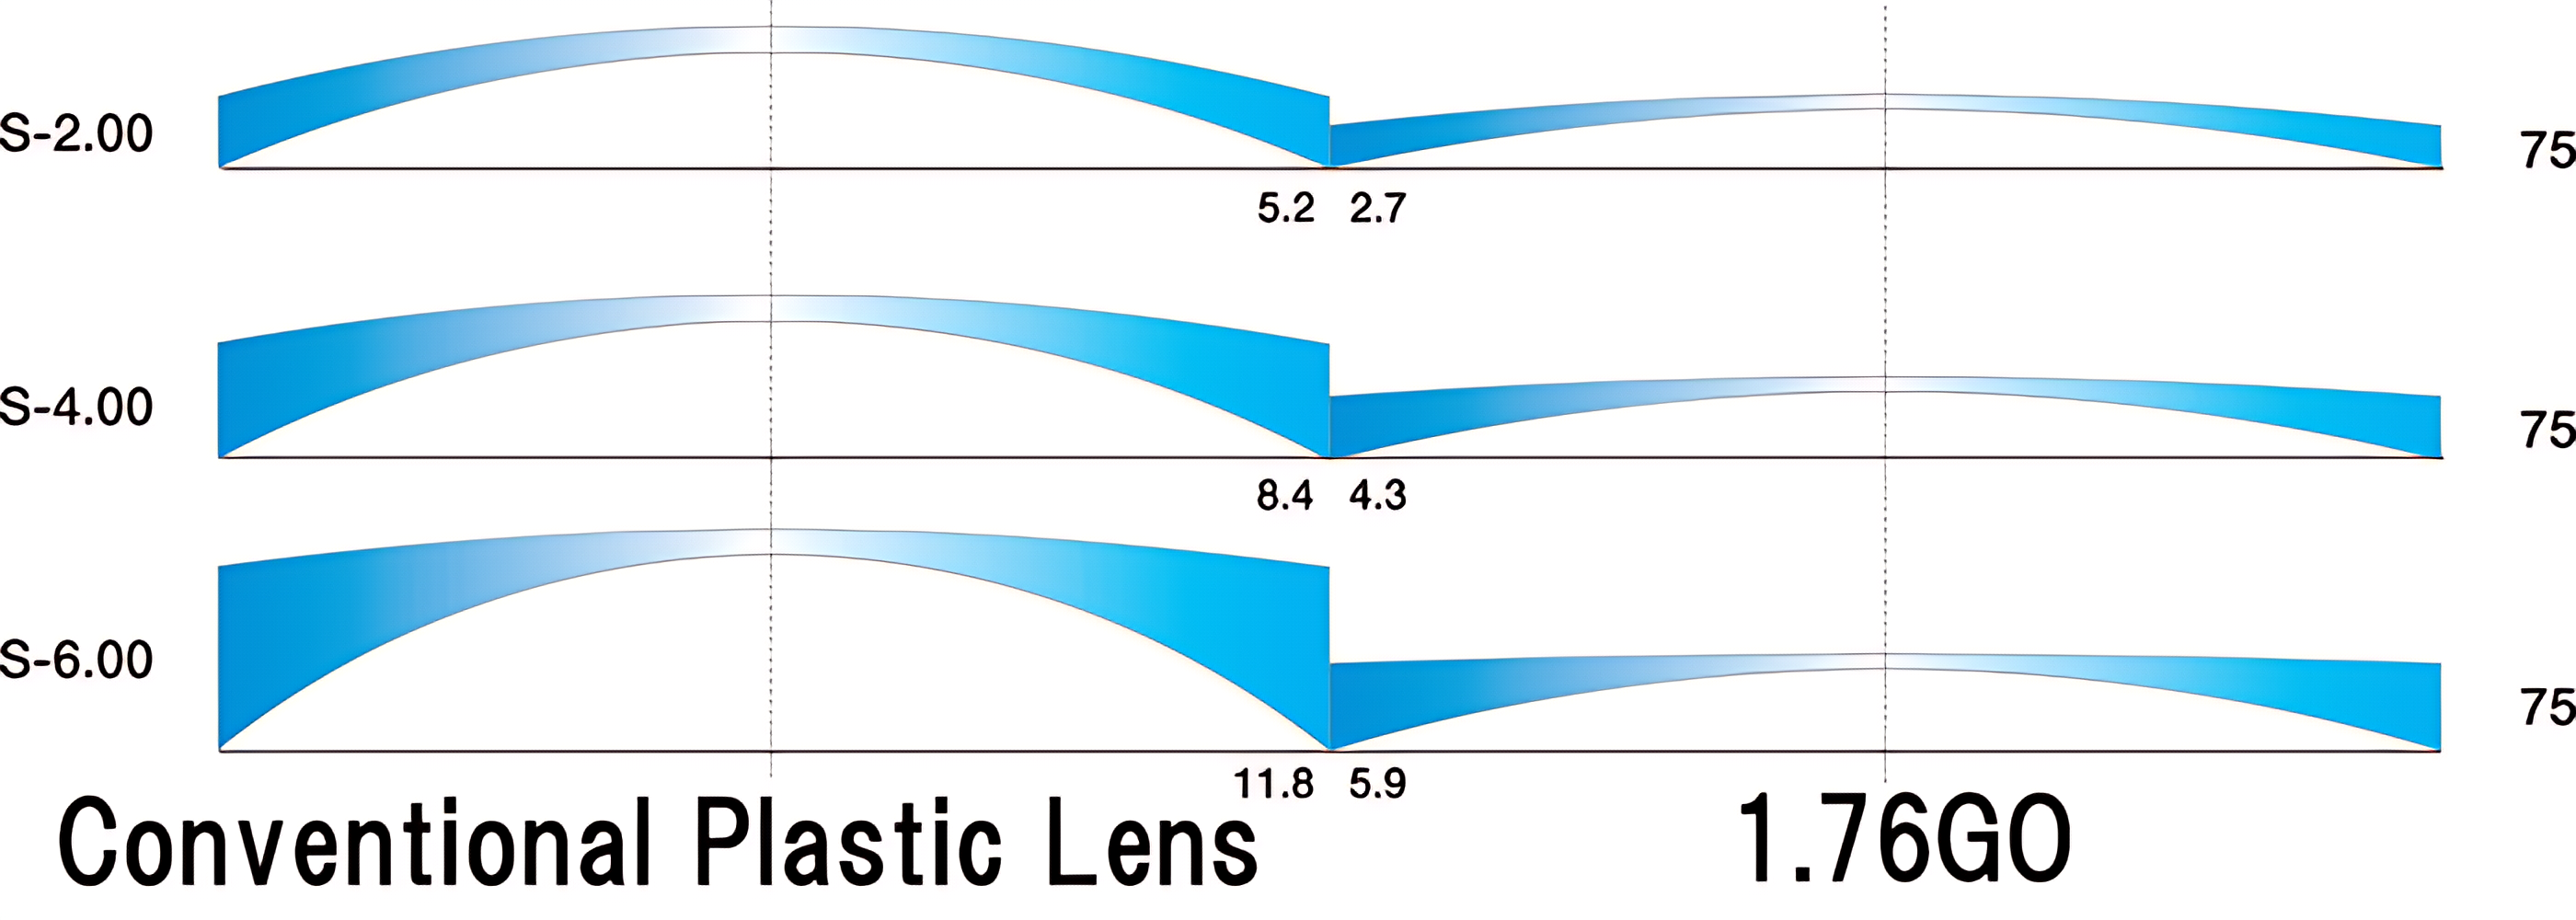 A graphic illustrating three conventional plastic lens profiles labeled S-2.00, S-4.00, and S-6.00. Each profile shows varying thickness, with the thinnest at S-2.00 and the thickest at S-6.00. On the right side of each lens profile, numerical values are indicated: 5.2 & 2.7 for S-2.00, 8.4 & 4.3 for S-4.00, and 11.8 & 5.9 for S-6.00. The background is titled "Conventional Plastic Lens" with the value "1.76G0" prominently displayed.